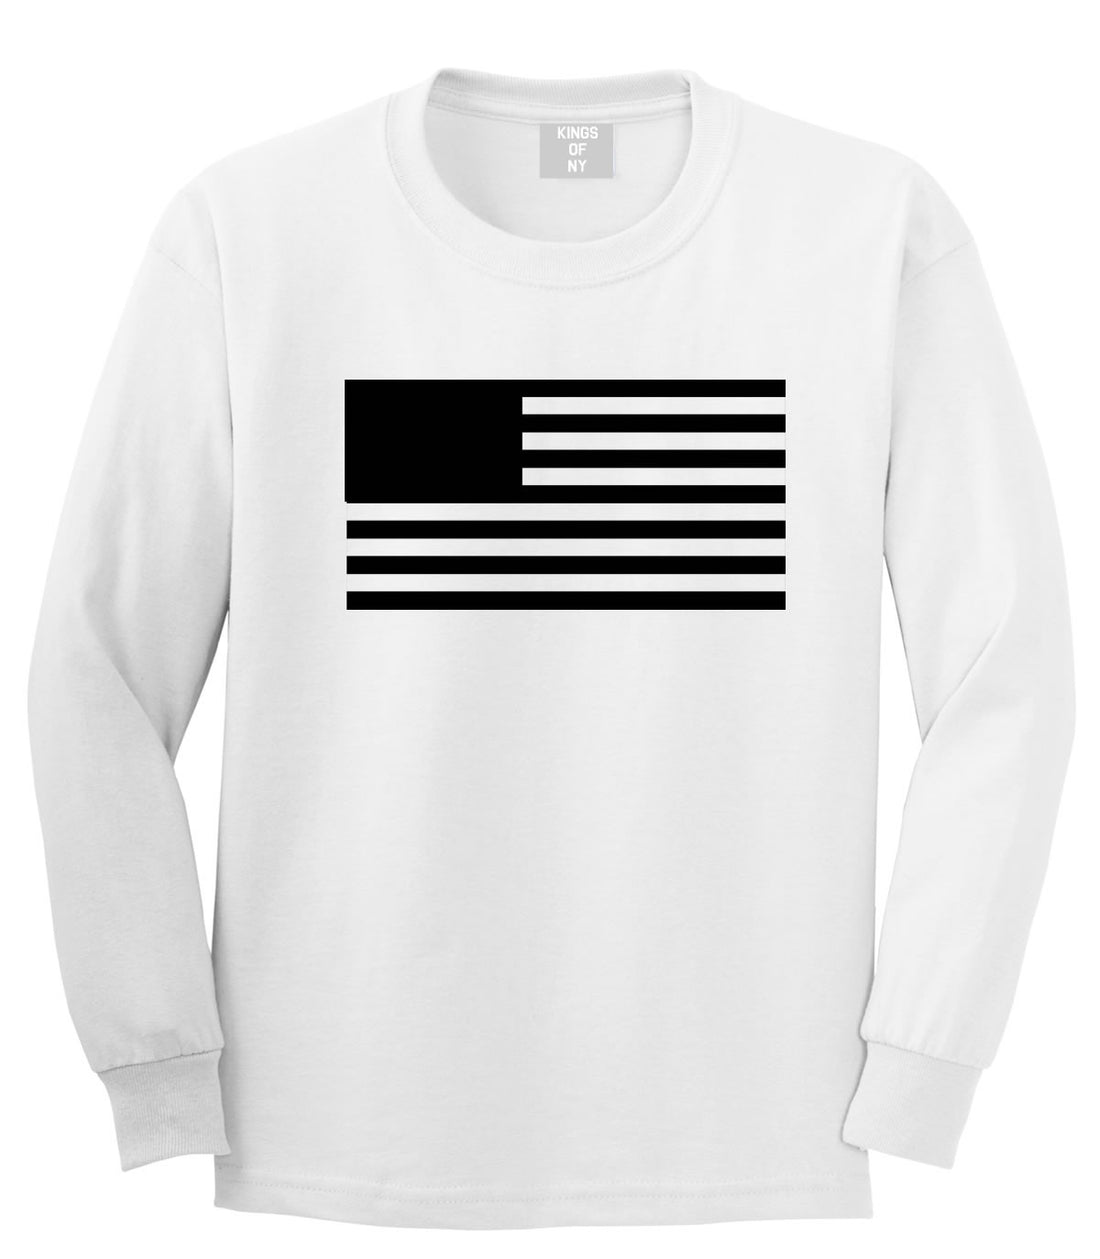 Kings Of NY American Flag Goth Style Long Sleeve T-Shirt in White